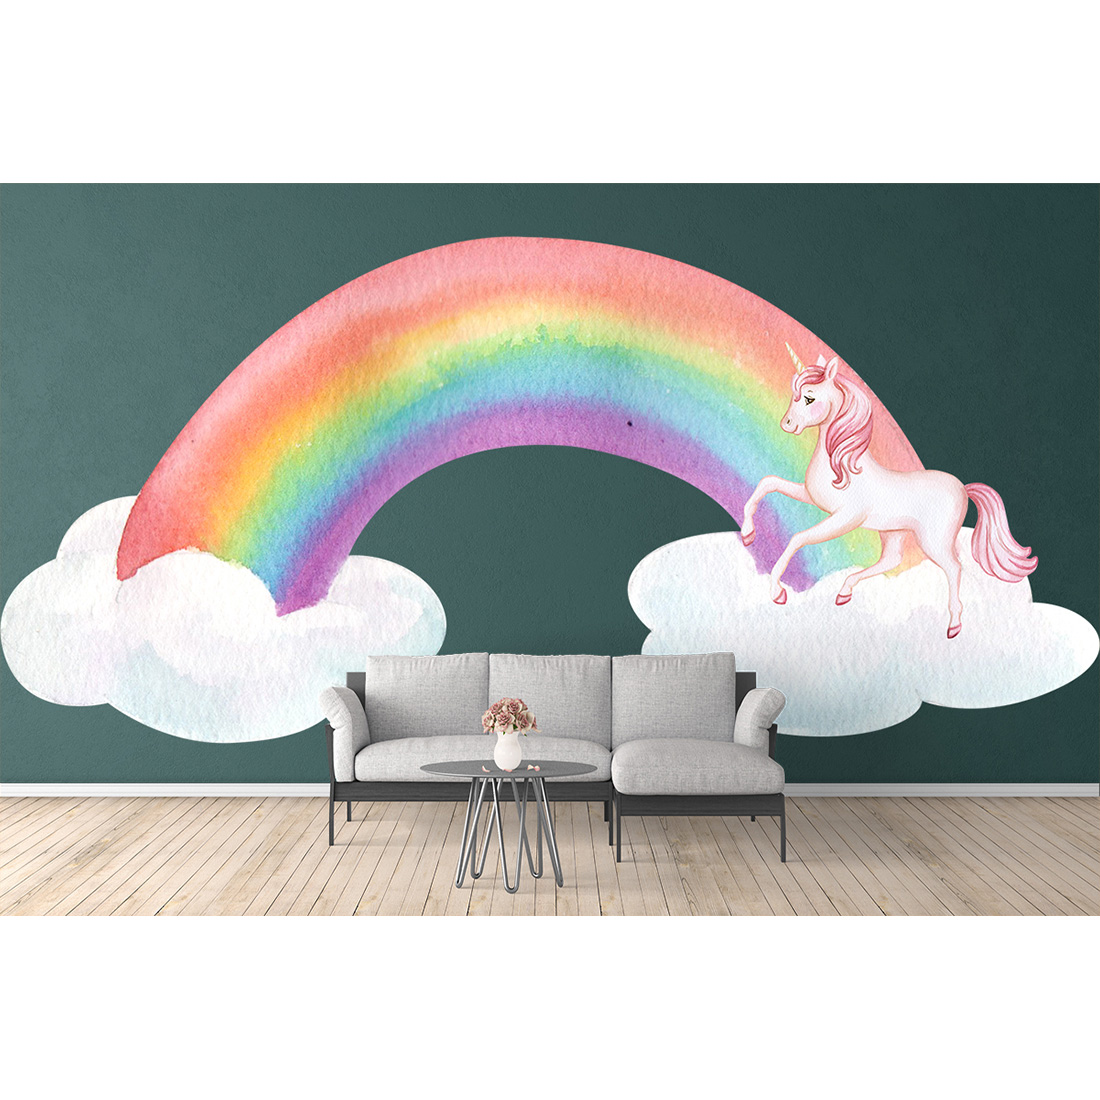 Beautiful picture of a unicorn and a rainbow on the wall